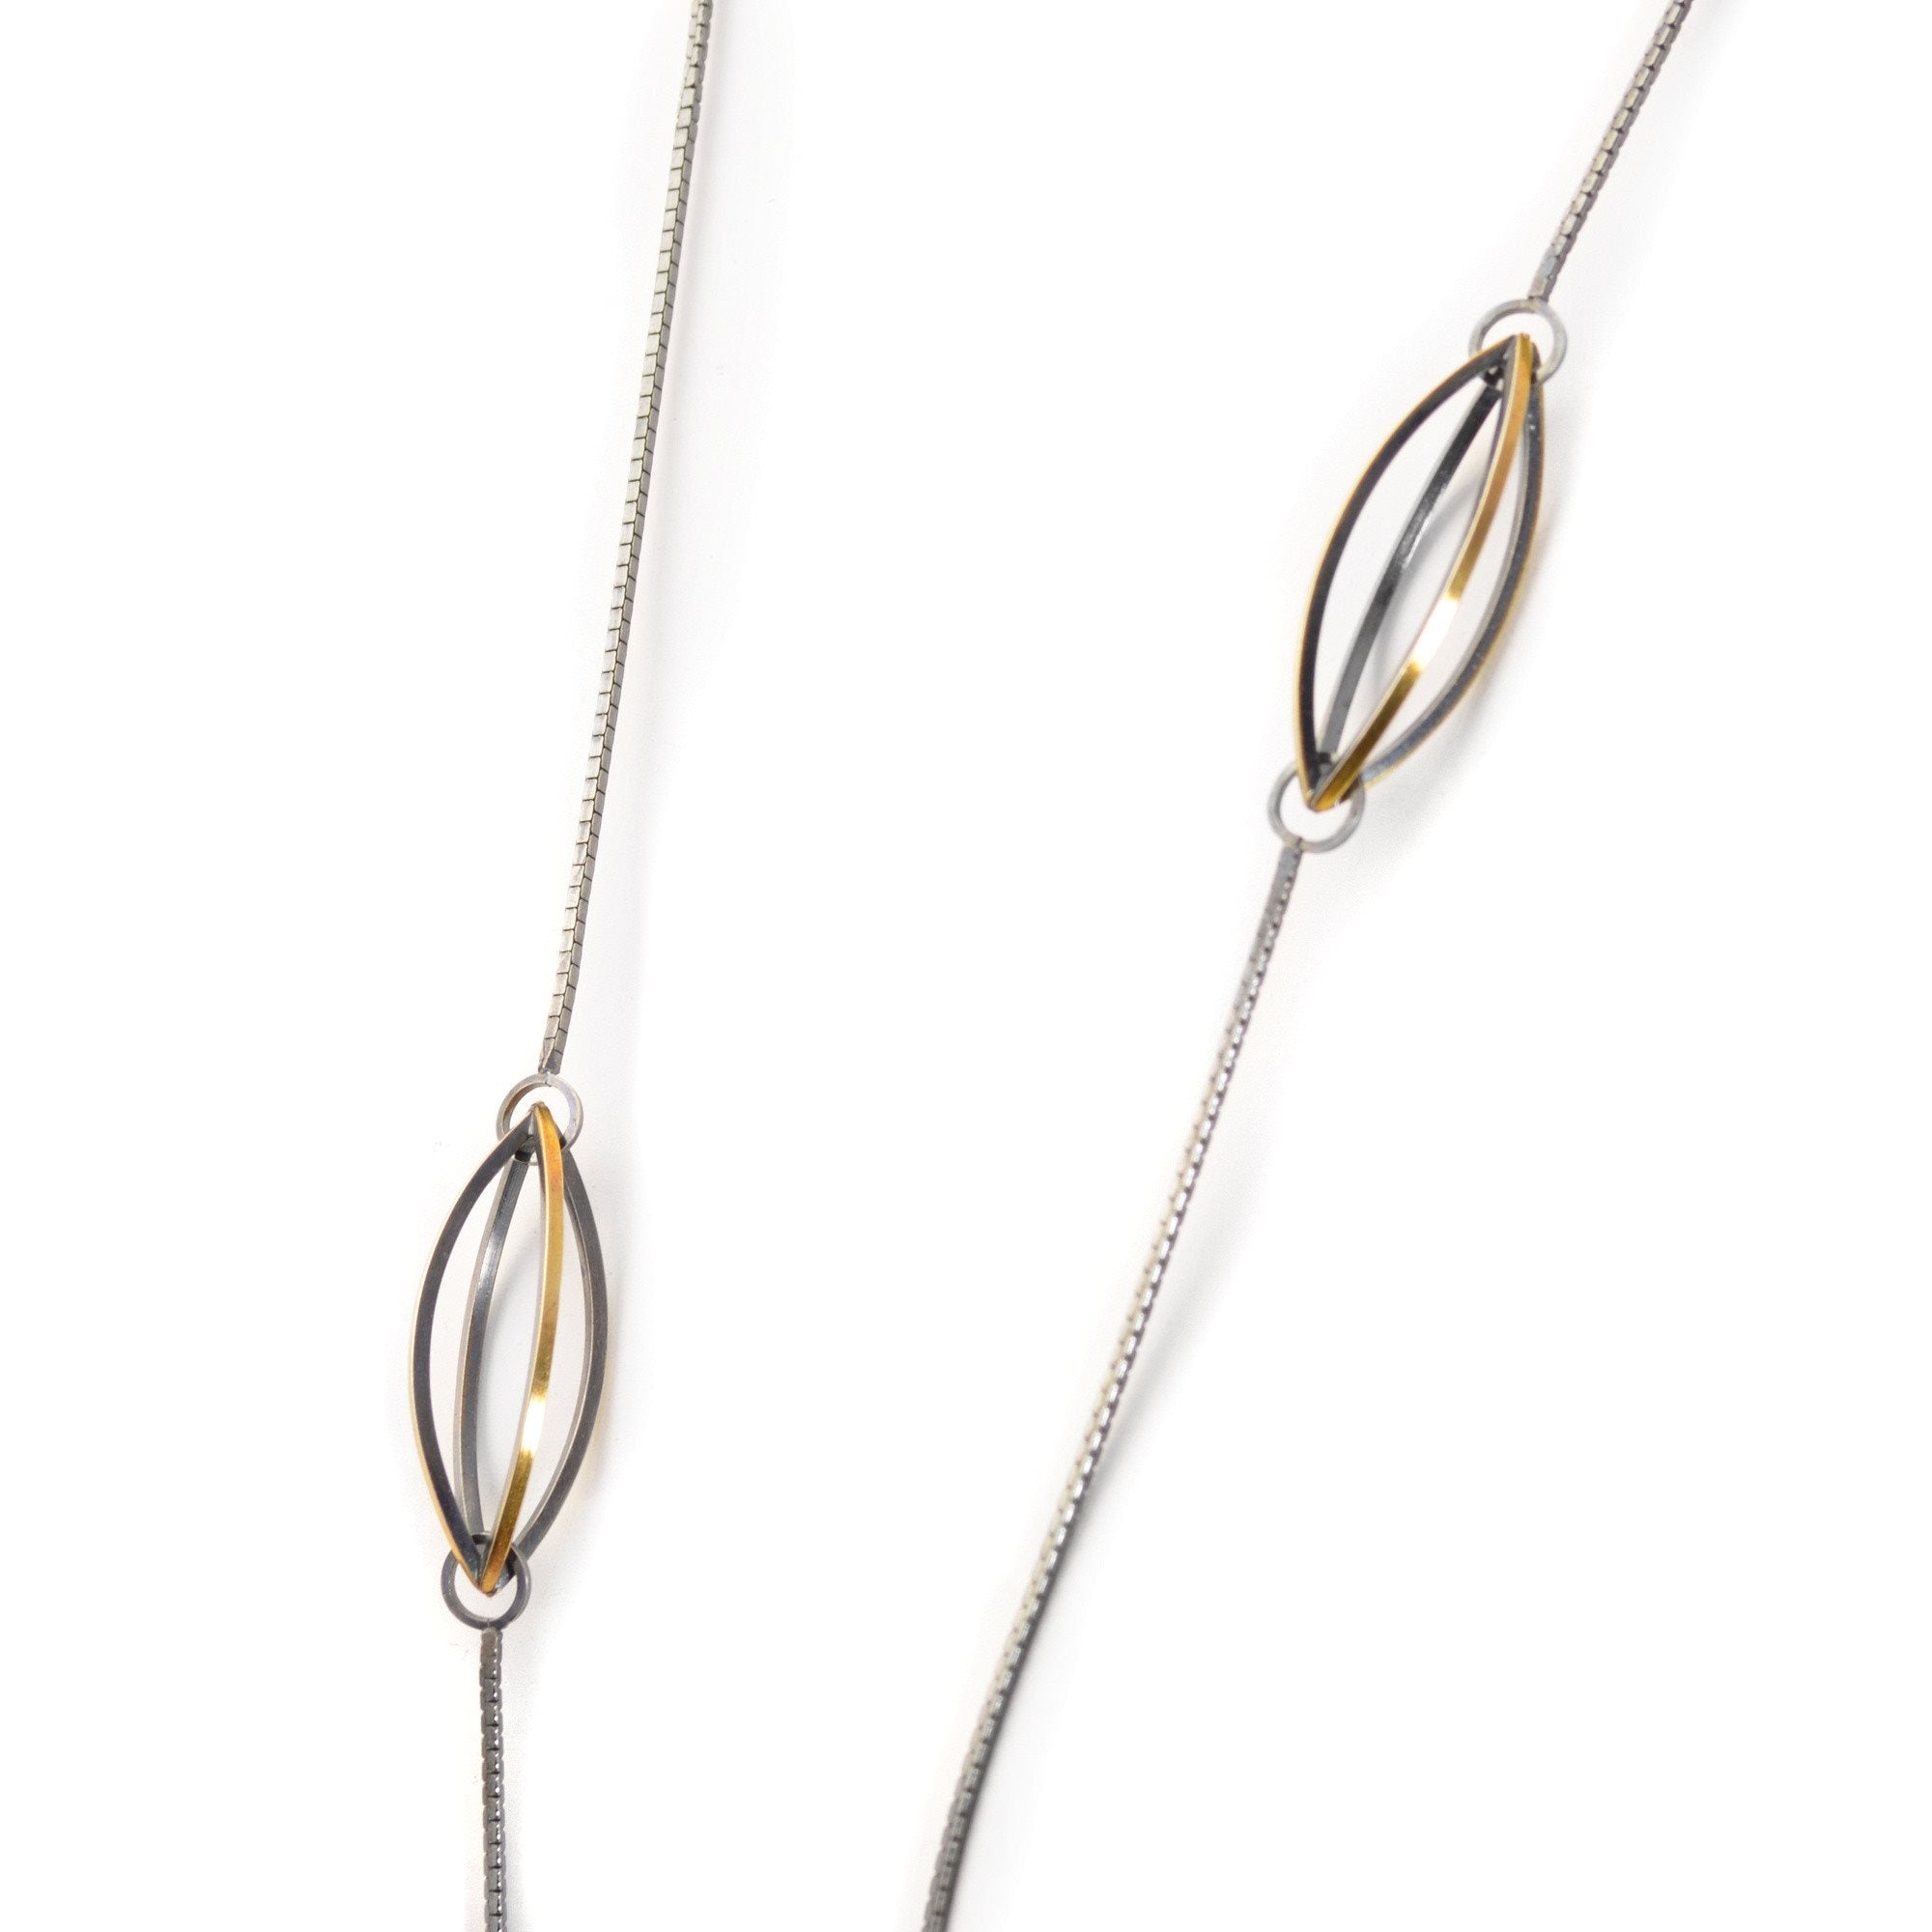 Lattis Long Necklace with Three Streamline Shapes in Sterling Silver, 22k gold and Blackened Patina